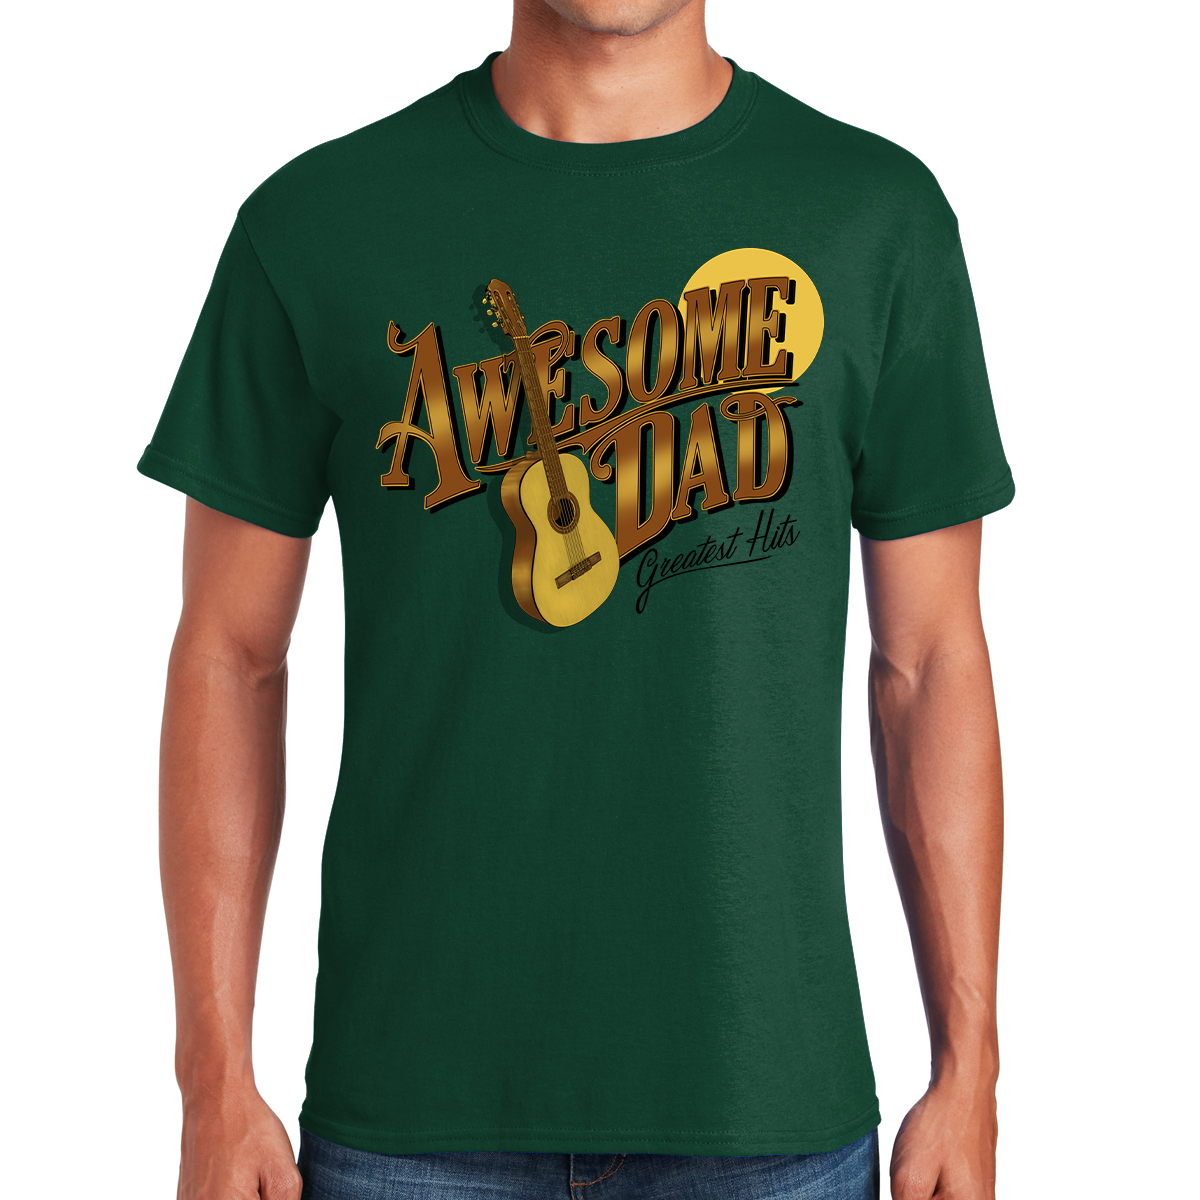 Awesome Dad Saxophone Player Serenading Fatherhood With Style Gift For Dads T-shirt